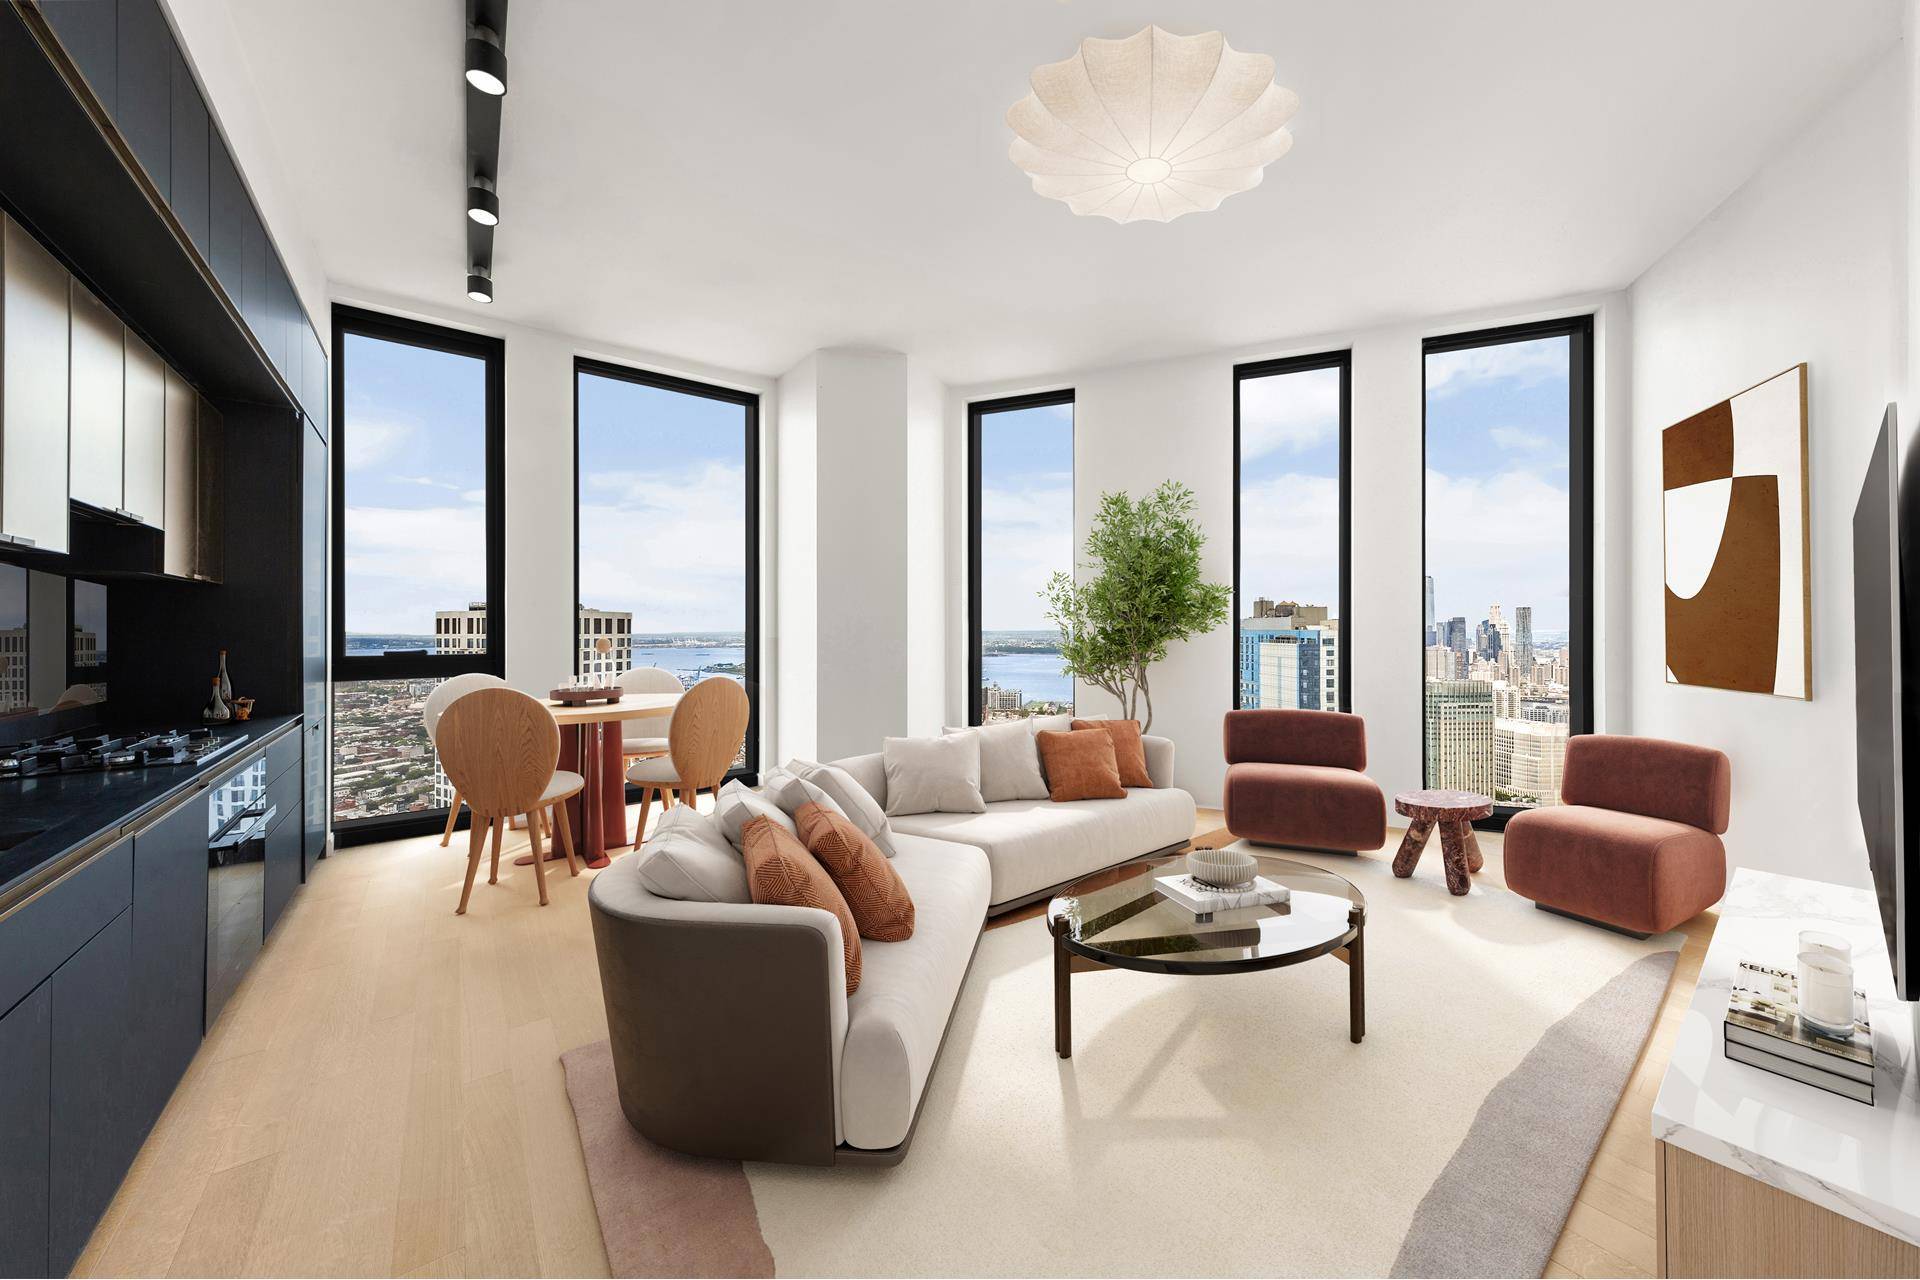 Fall 2023 Occupancy A proud place to call home, Residence 56A at The Brooklyn Tower comprises 859 square feet, offering one bedroom, one and a half bathroom, and expansive views ...